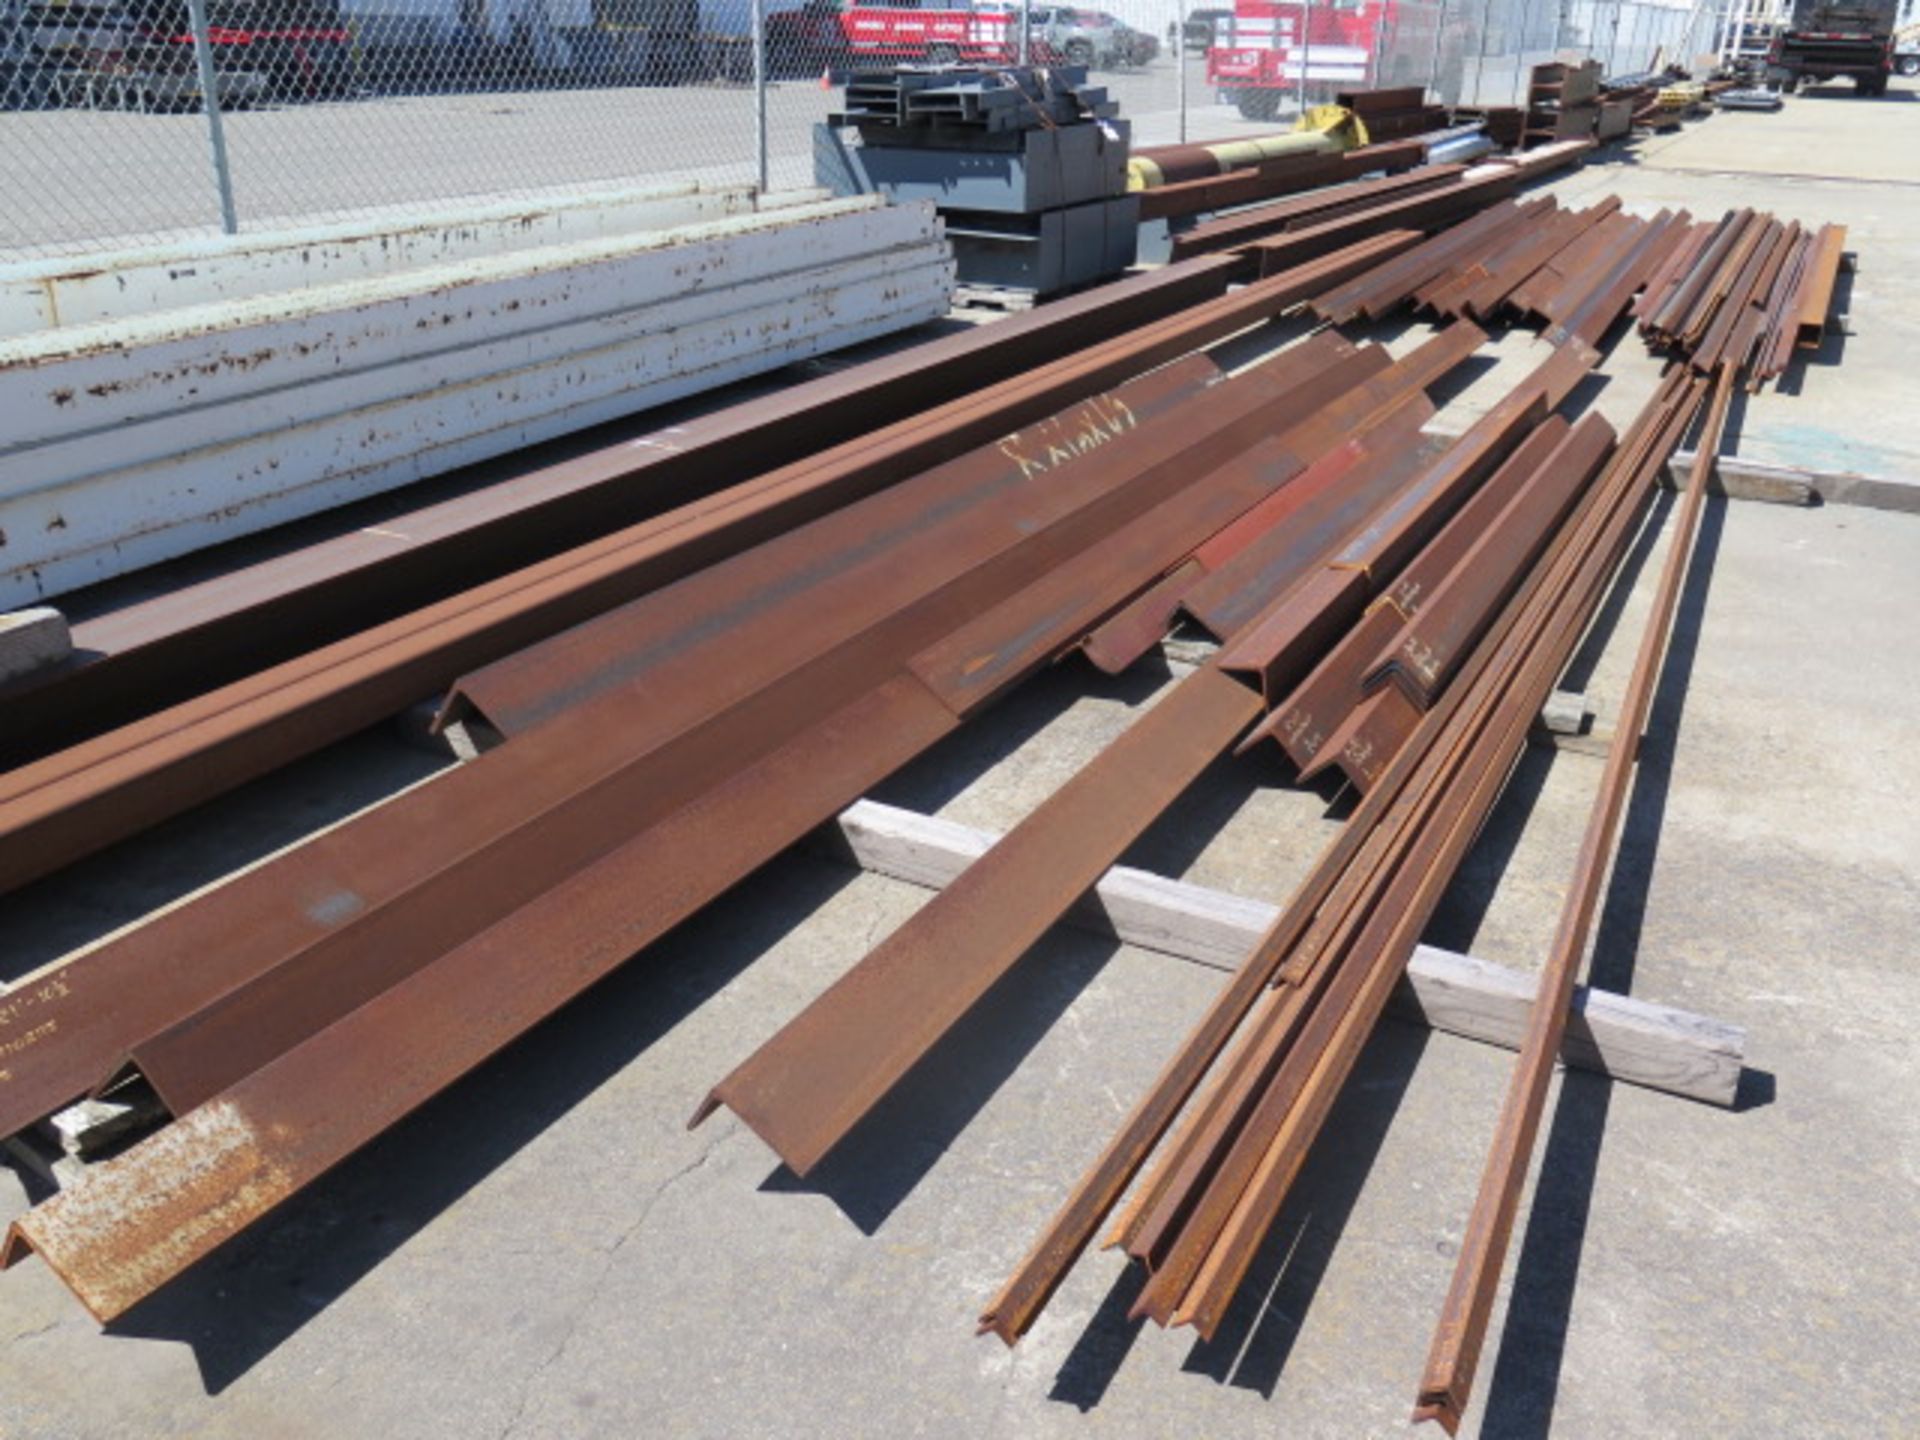 Raw Materials H-Beam, I-Beam, Channel, Square and Round Tubing, Angle and Galvanized Grating (SOLD - Image 2 of 22